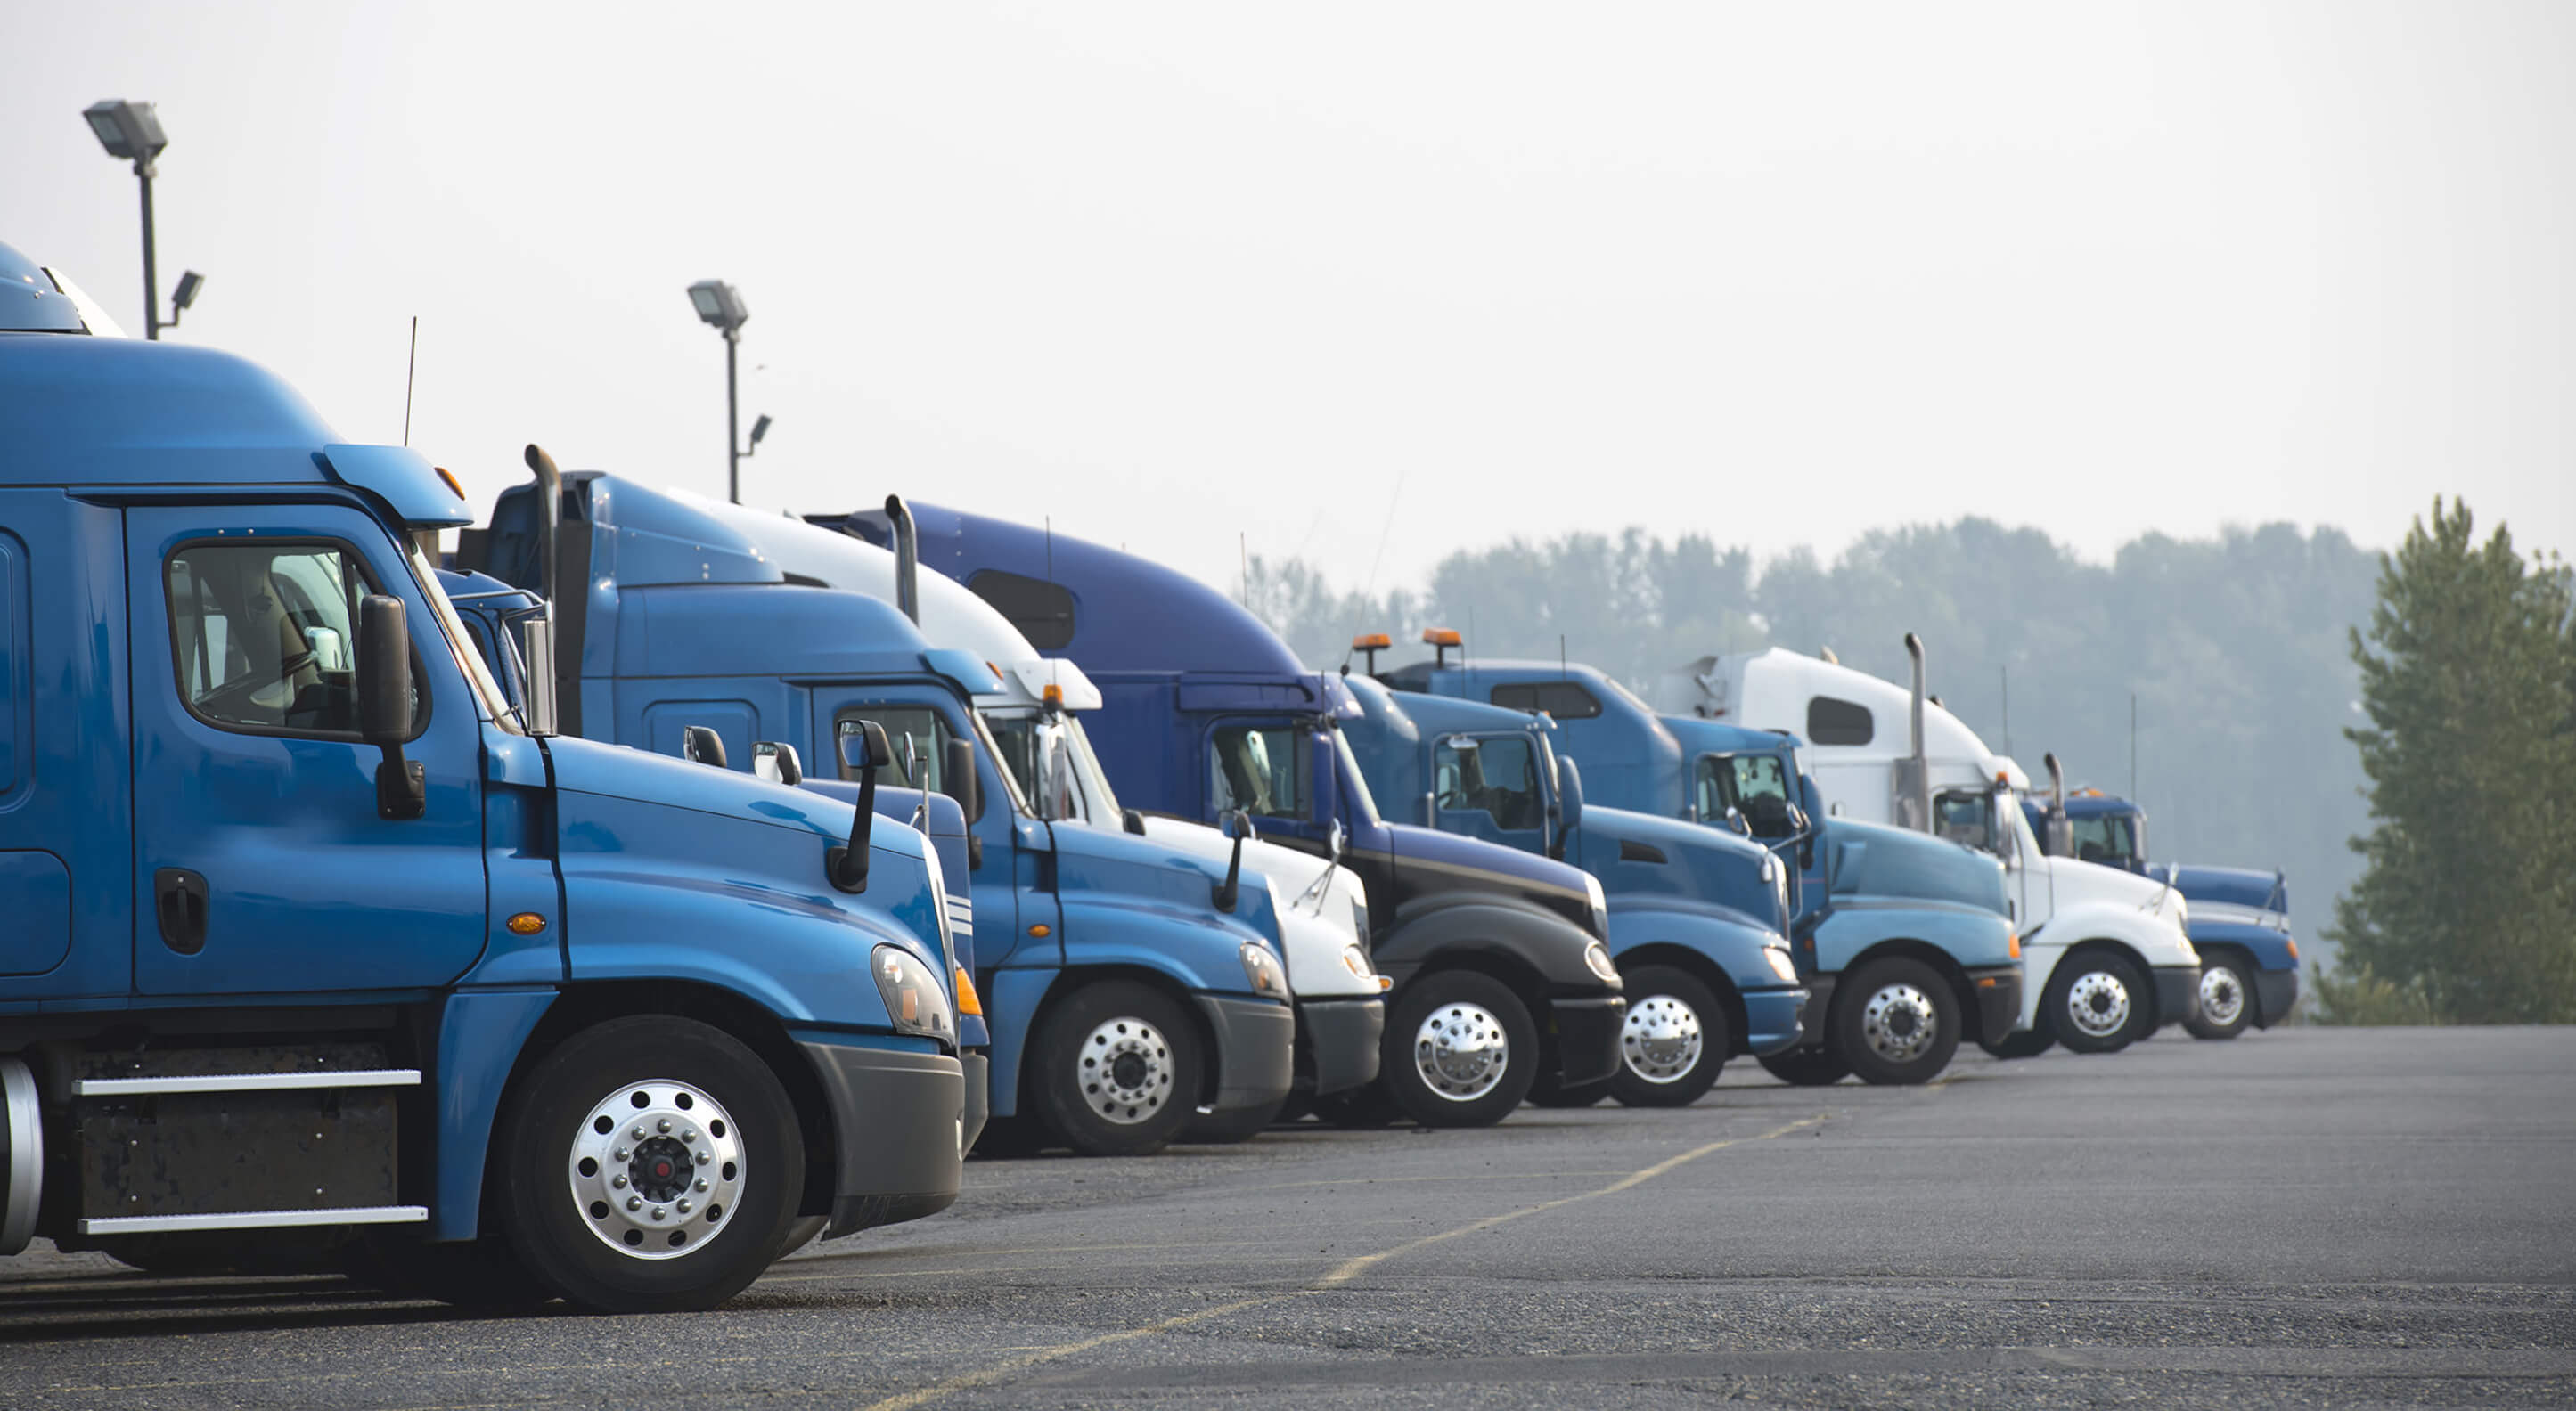 row of blue semi truck for sale at a parking lot